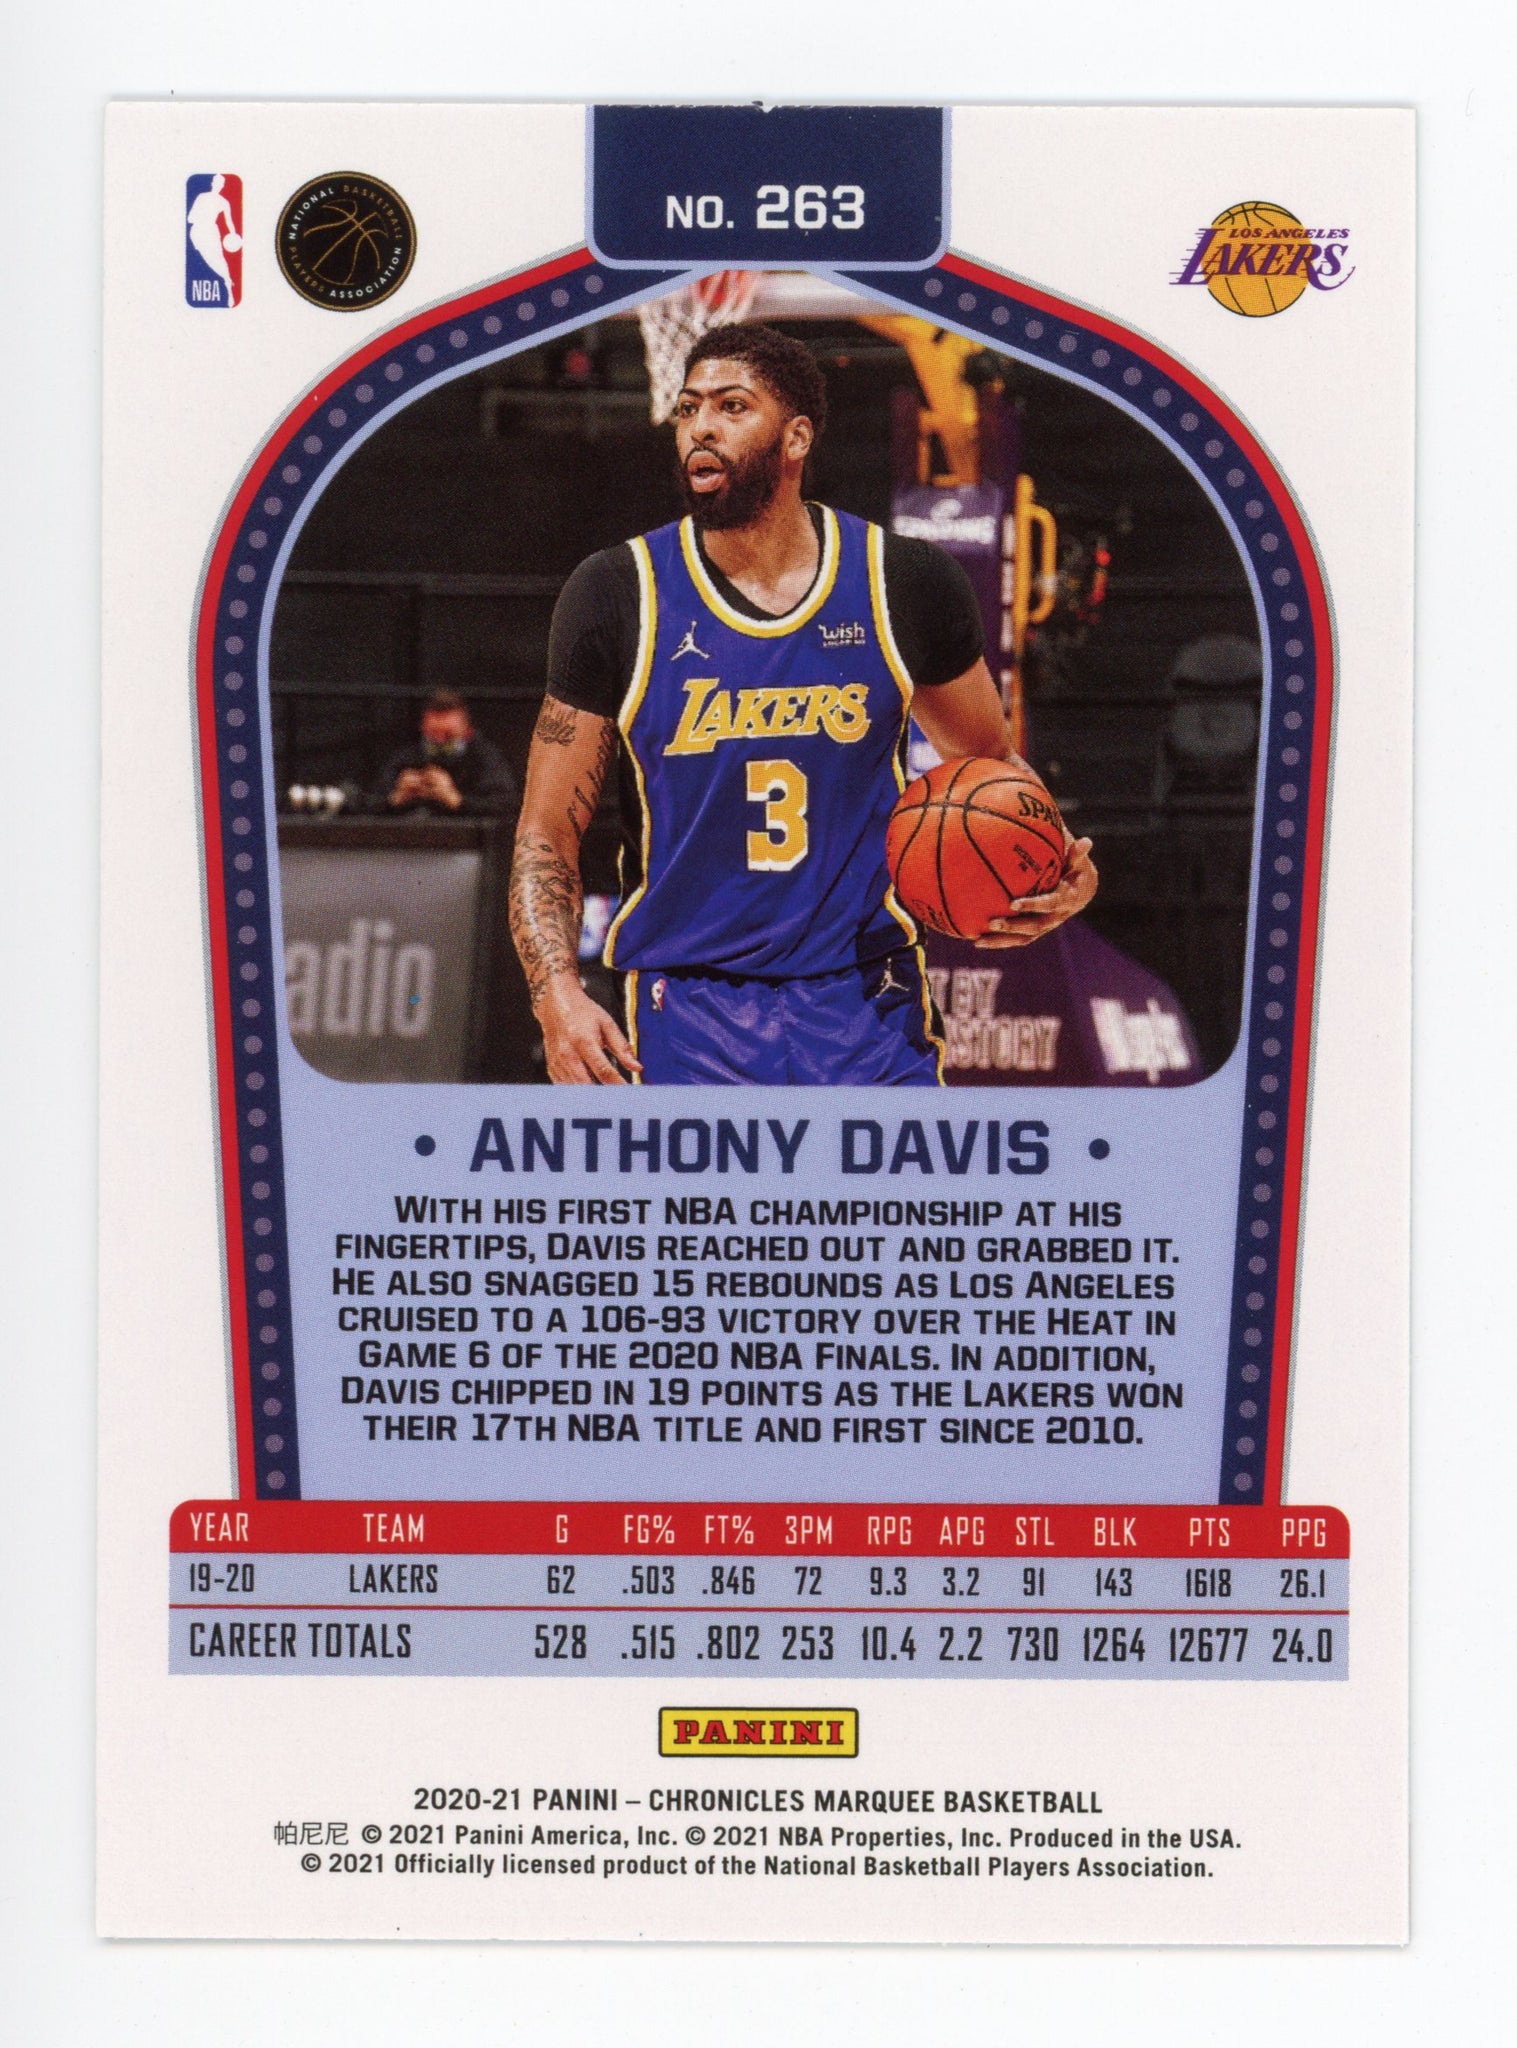 2020-2021 Anthony Davis Marquee Rookie Panini Los Angeles Lakers # 263